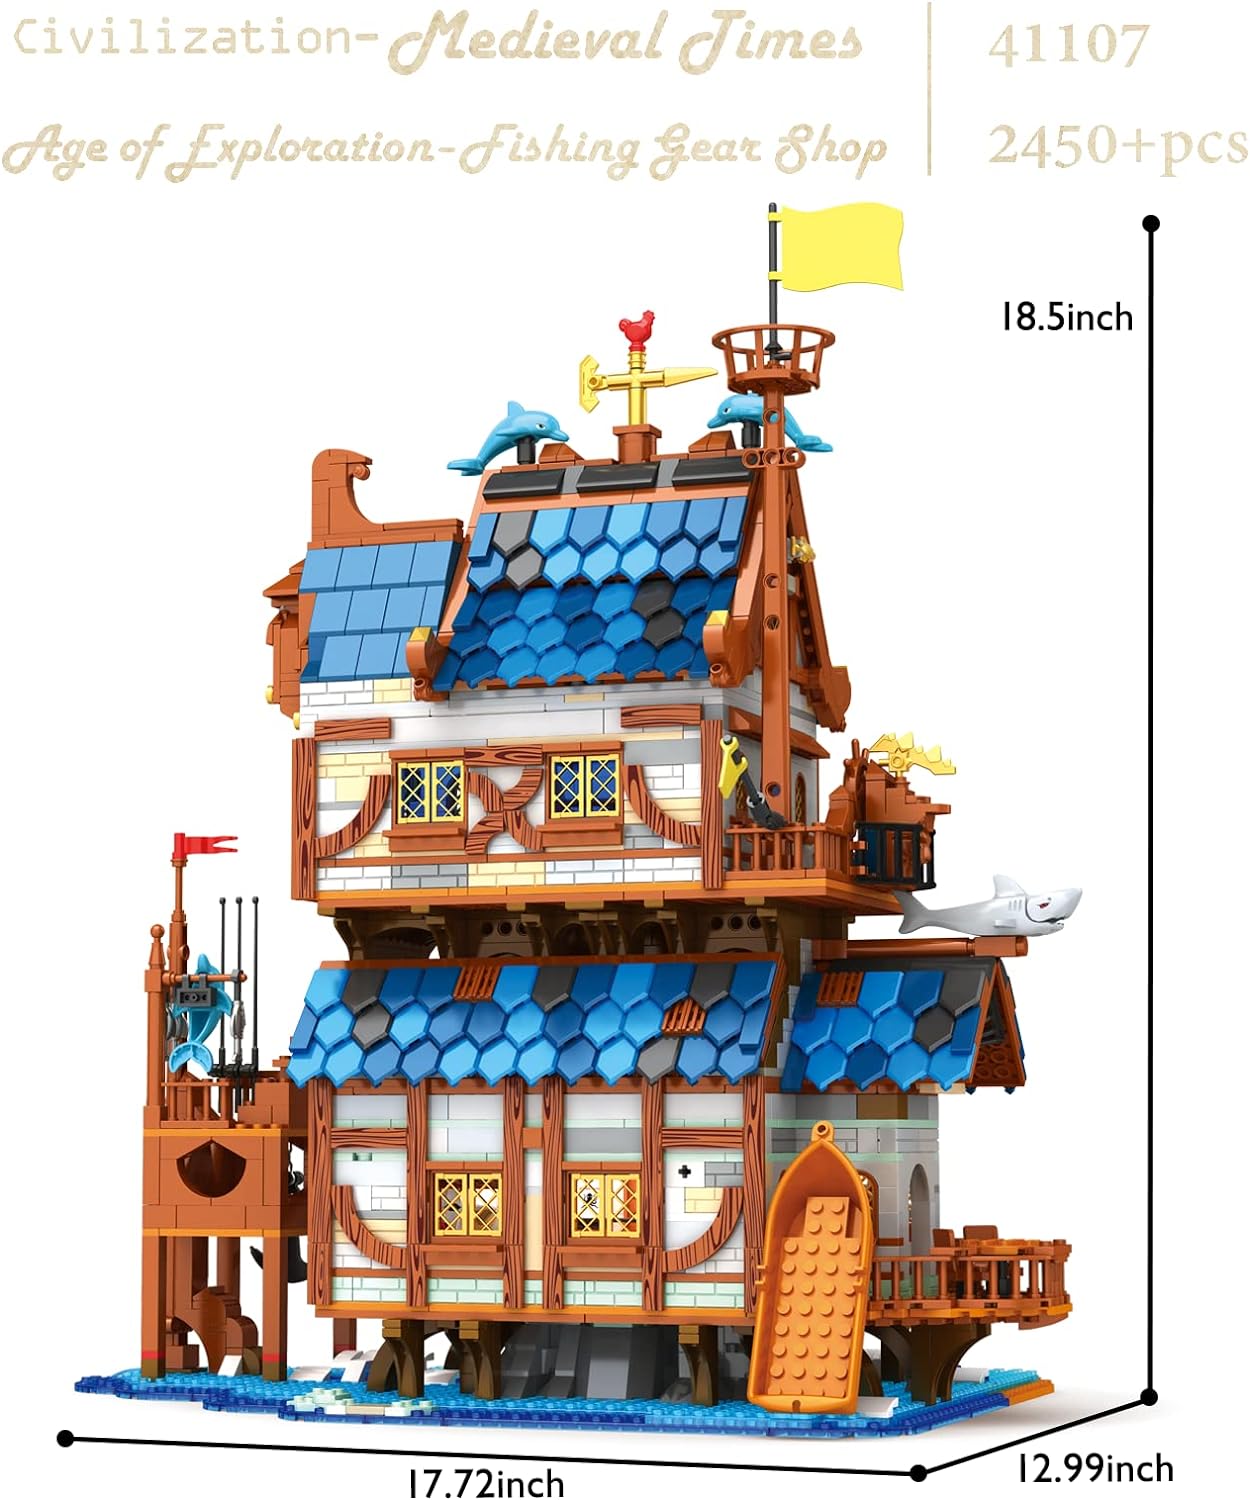 JMBricklayer Medieval Fishing Shop Building Sets for Adults, LED Lighting Kit Creative Fishing Gear Store Castle House Model Toy, Collectible or Home Display, Ideas Gifts for Boys Girls 41107